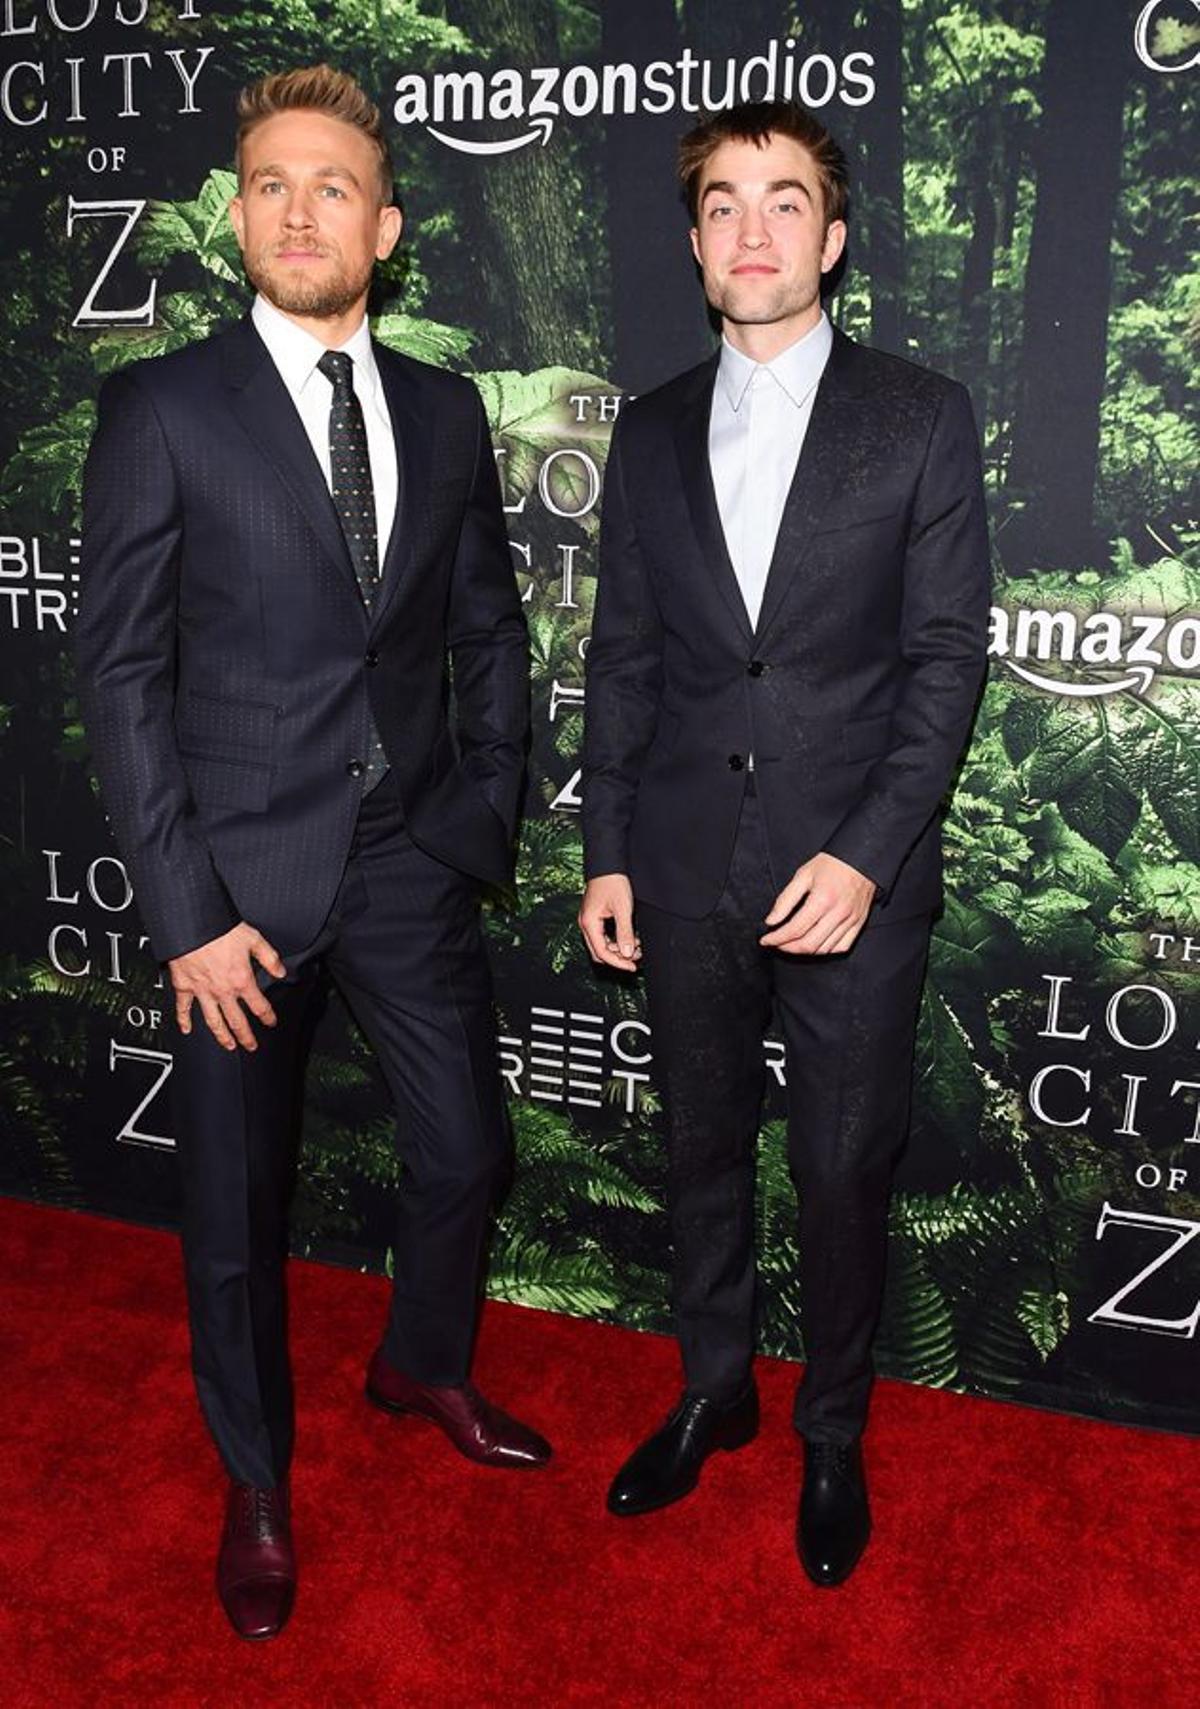 Premier 'The Lost City of Z': Robert Pattinson y Charlie Hunnam